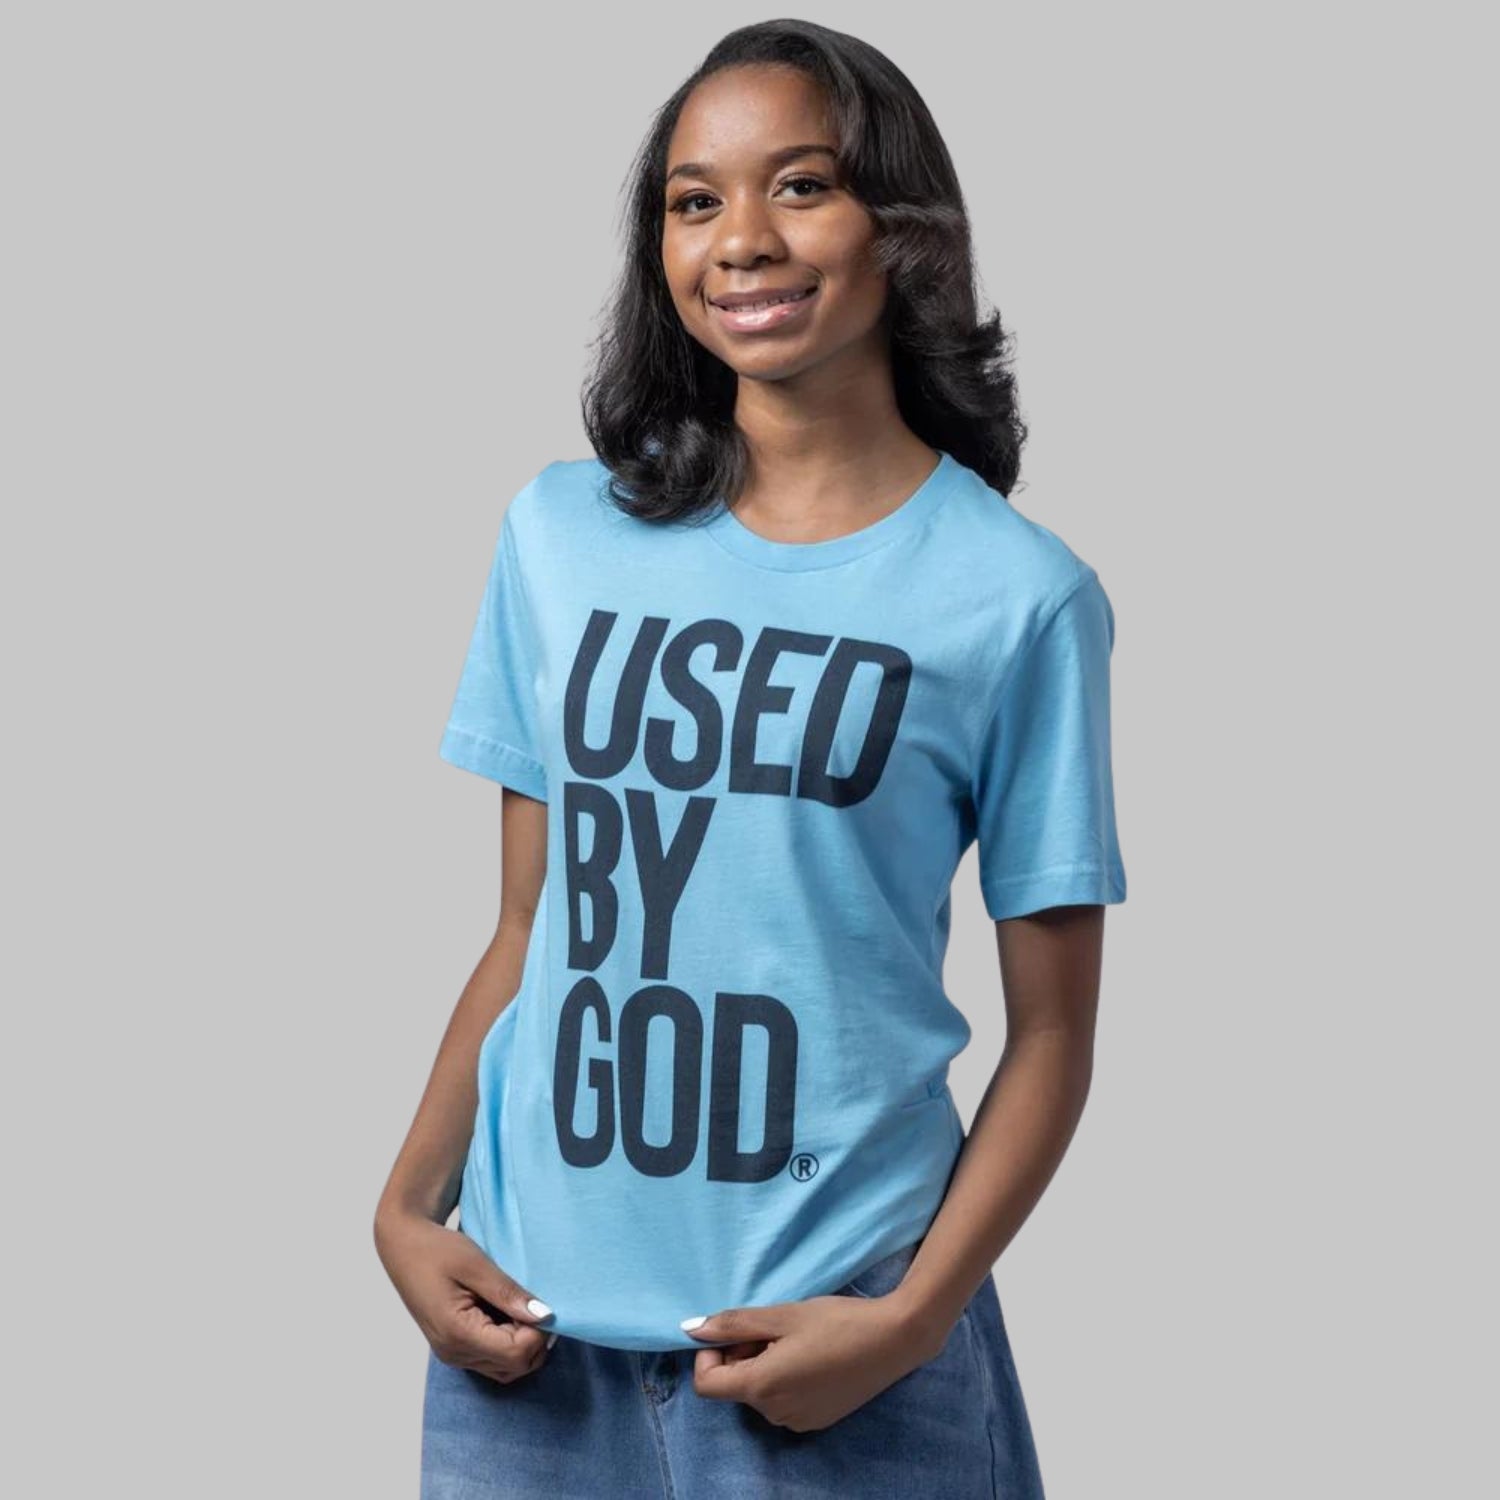 Used By God T-Shirt